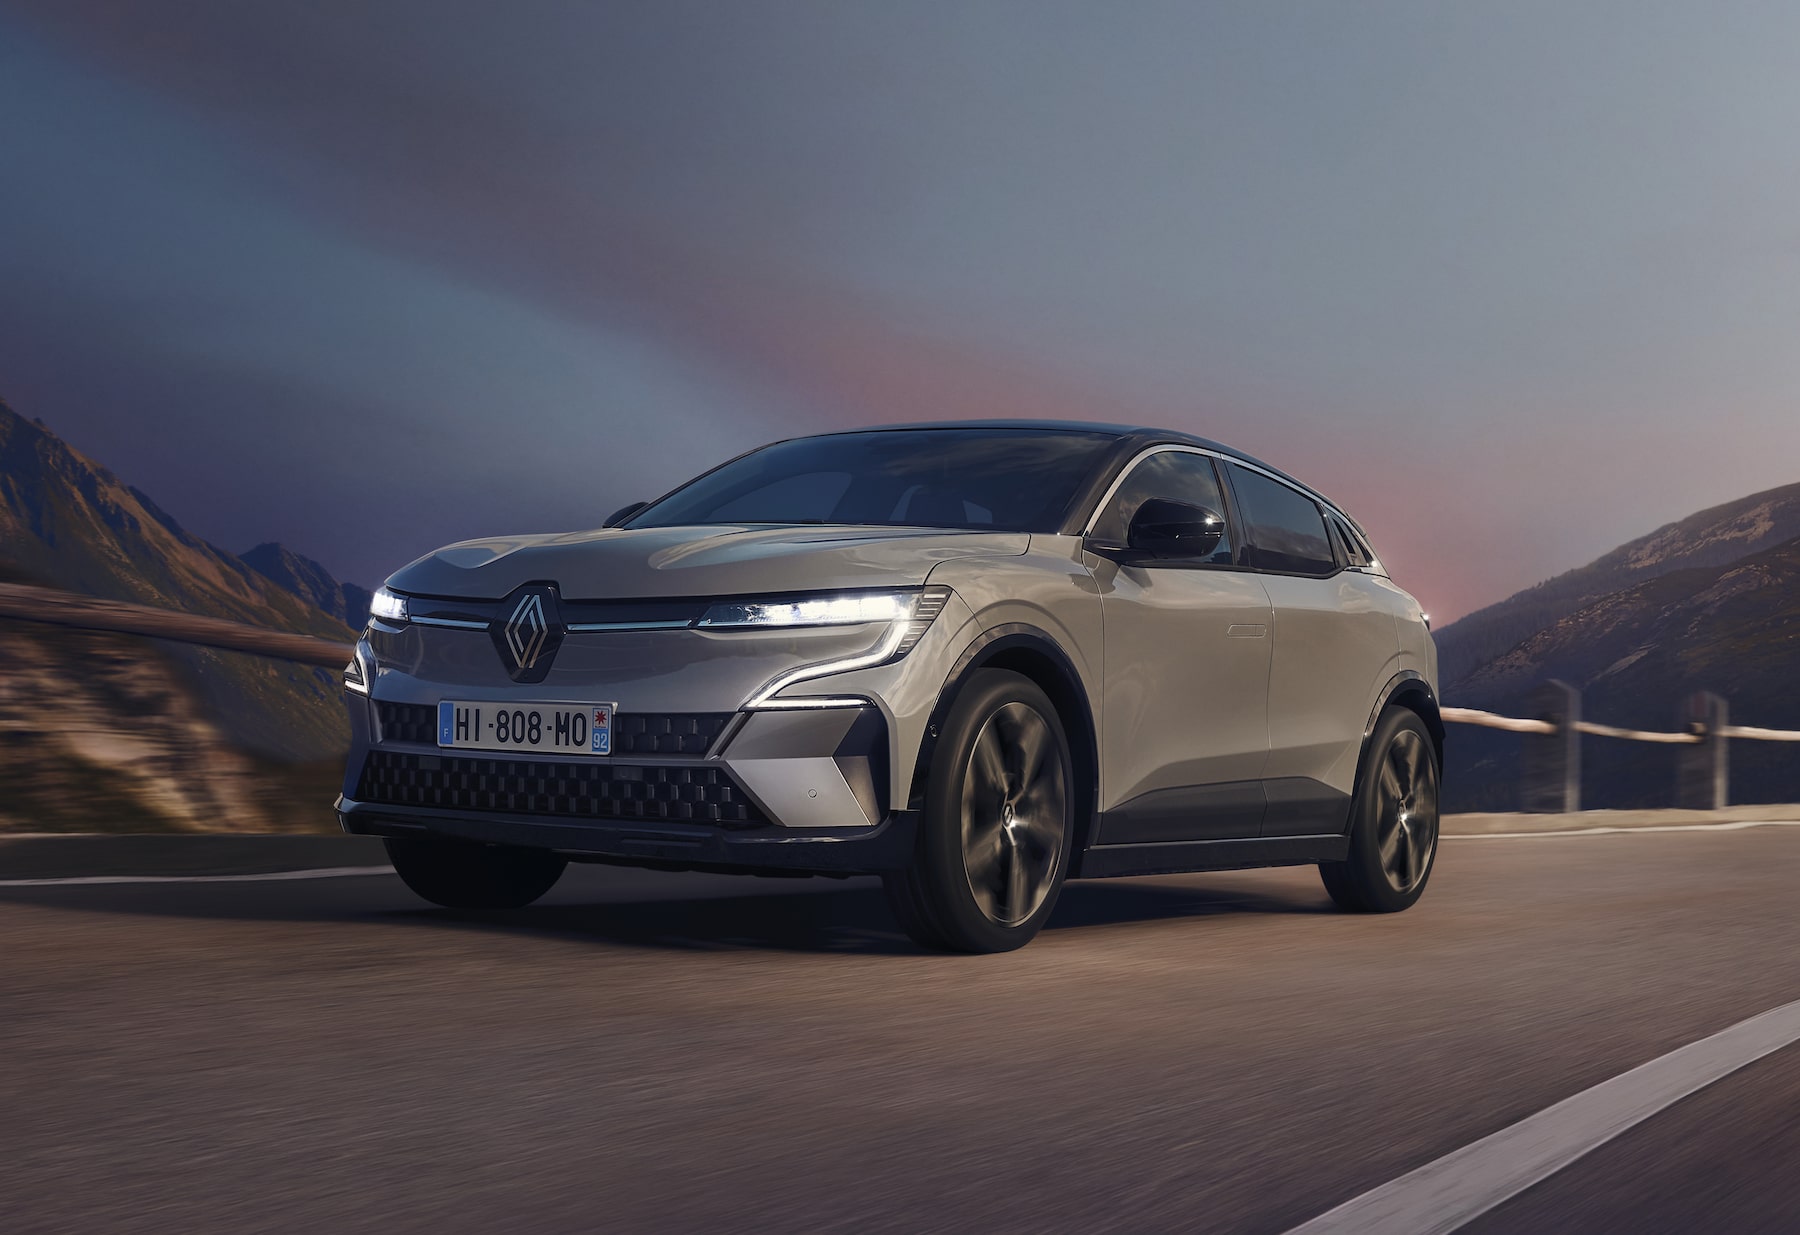 Renault Opens Orders for Megane E-Tech, Priced from $64,990